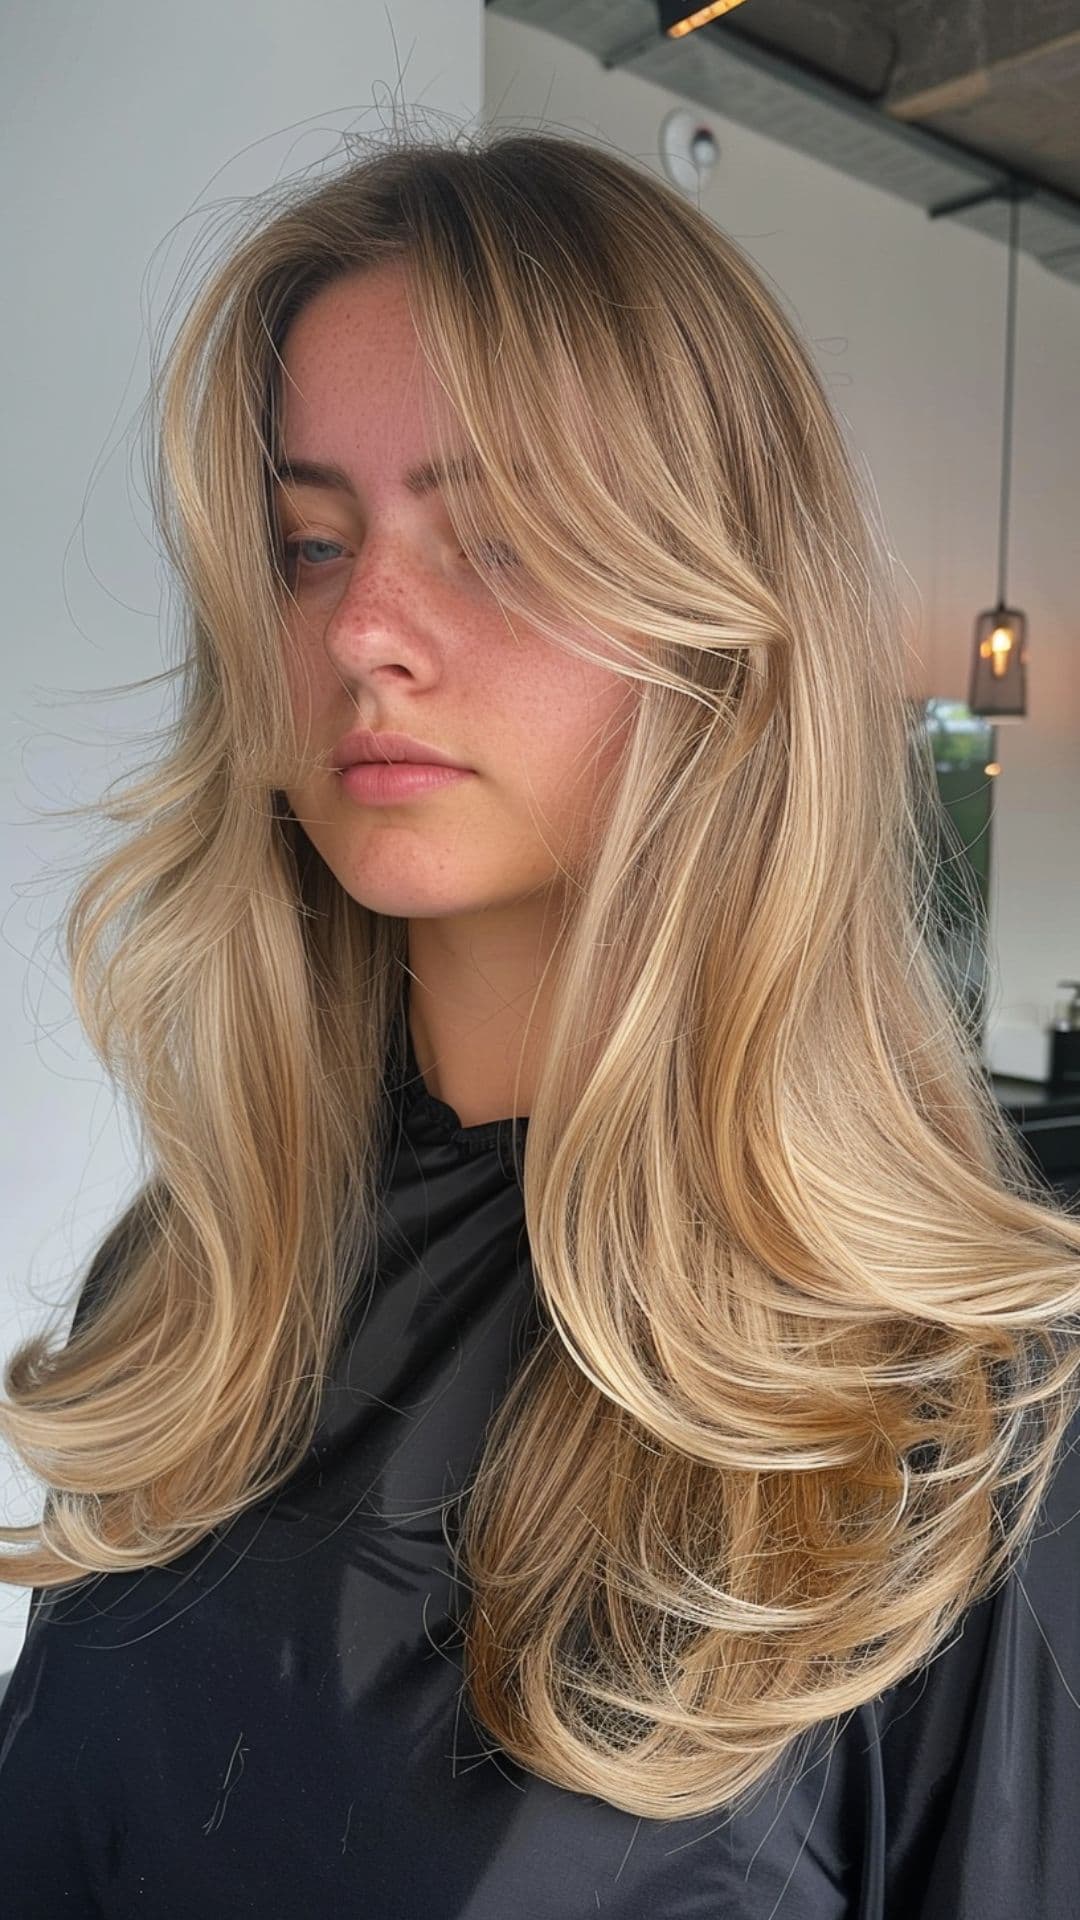 A woman modelling a champagne blonde highlights hairstyle.